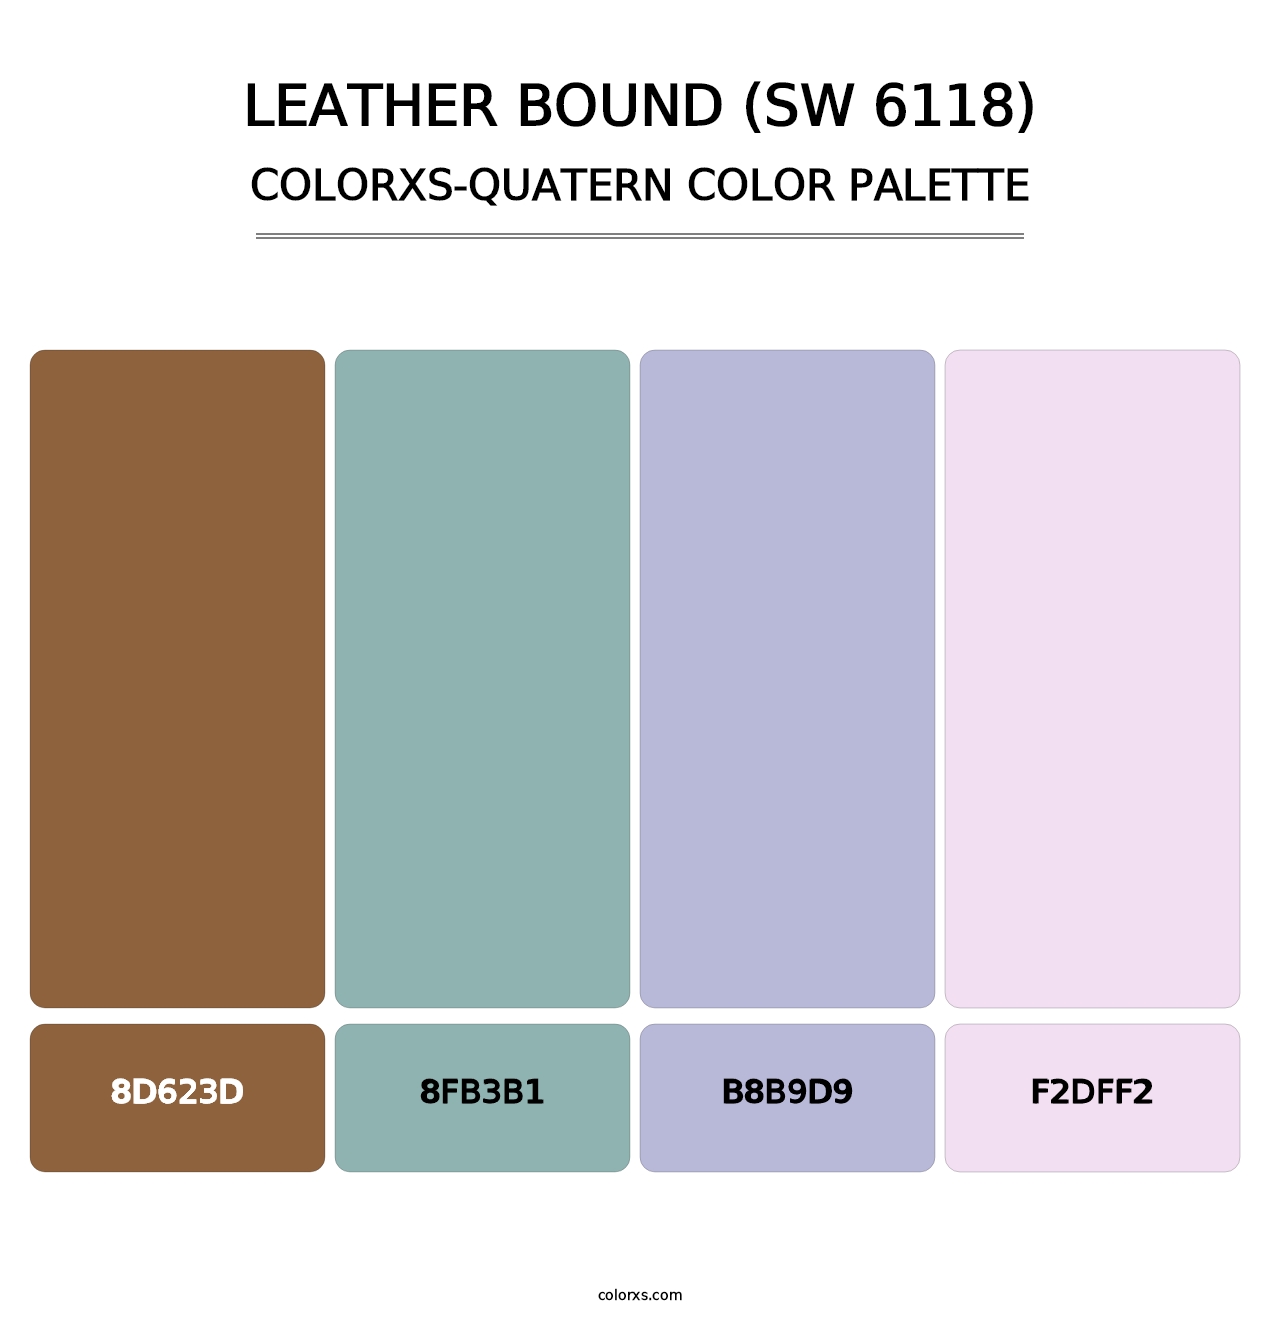 Leather Bound (SW 6118) - Colorxs Quatern Palette